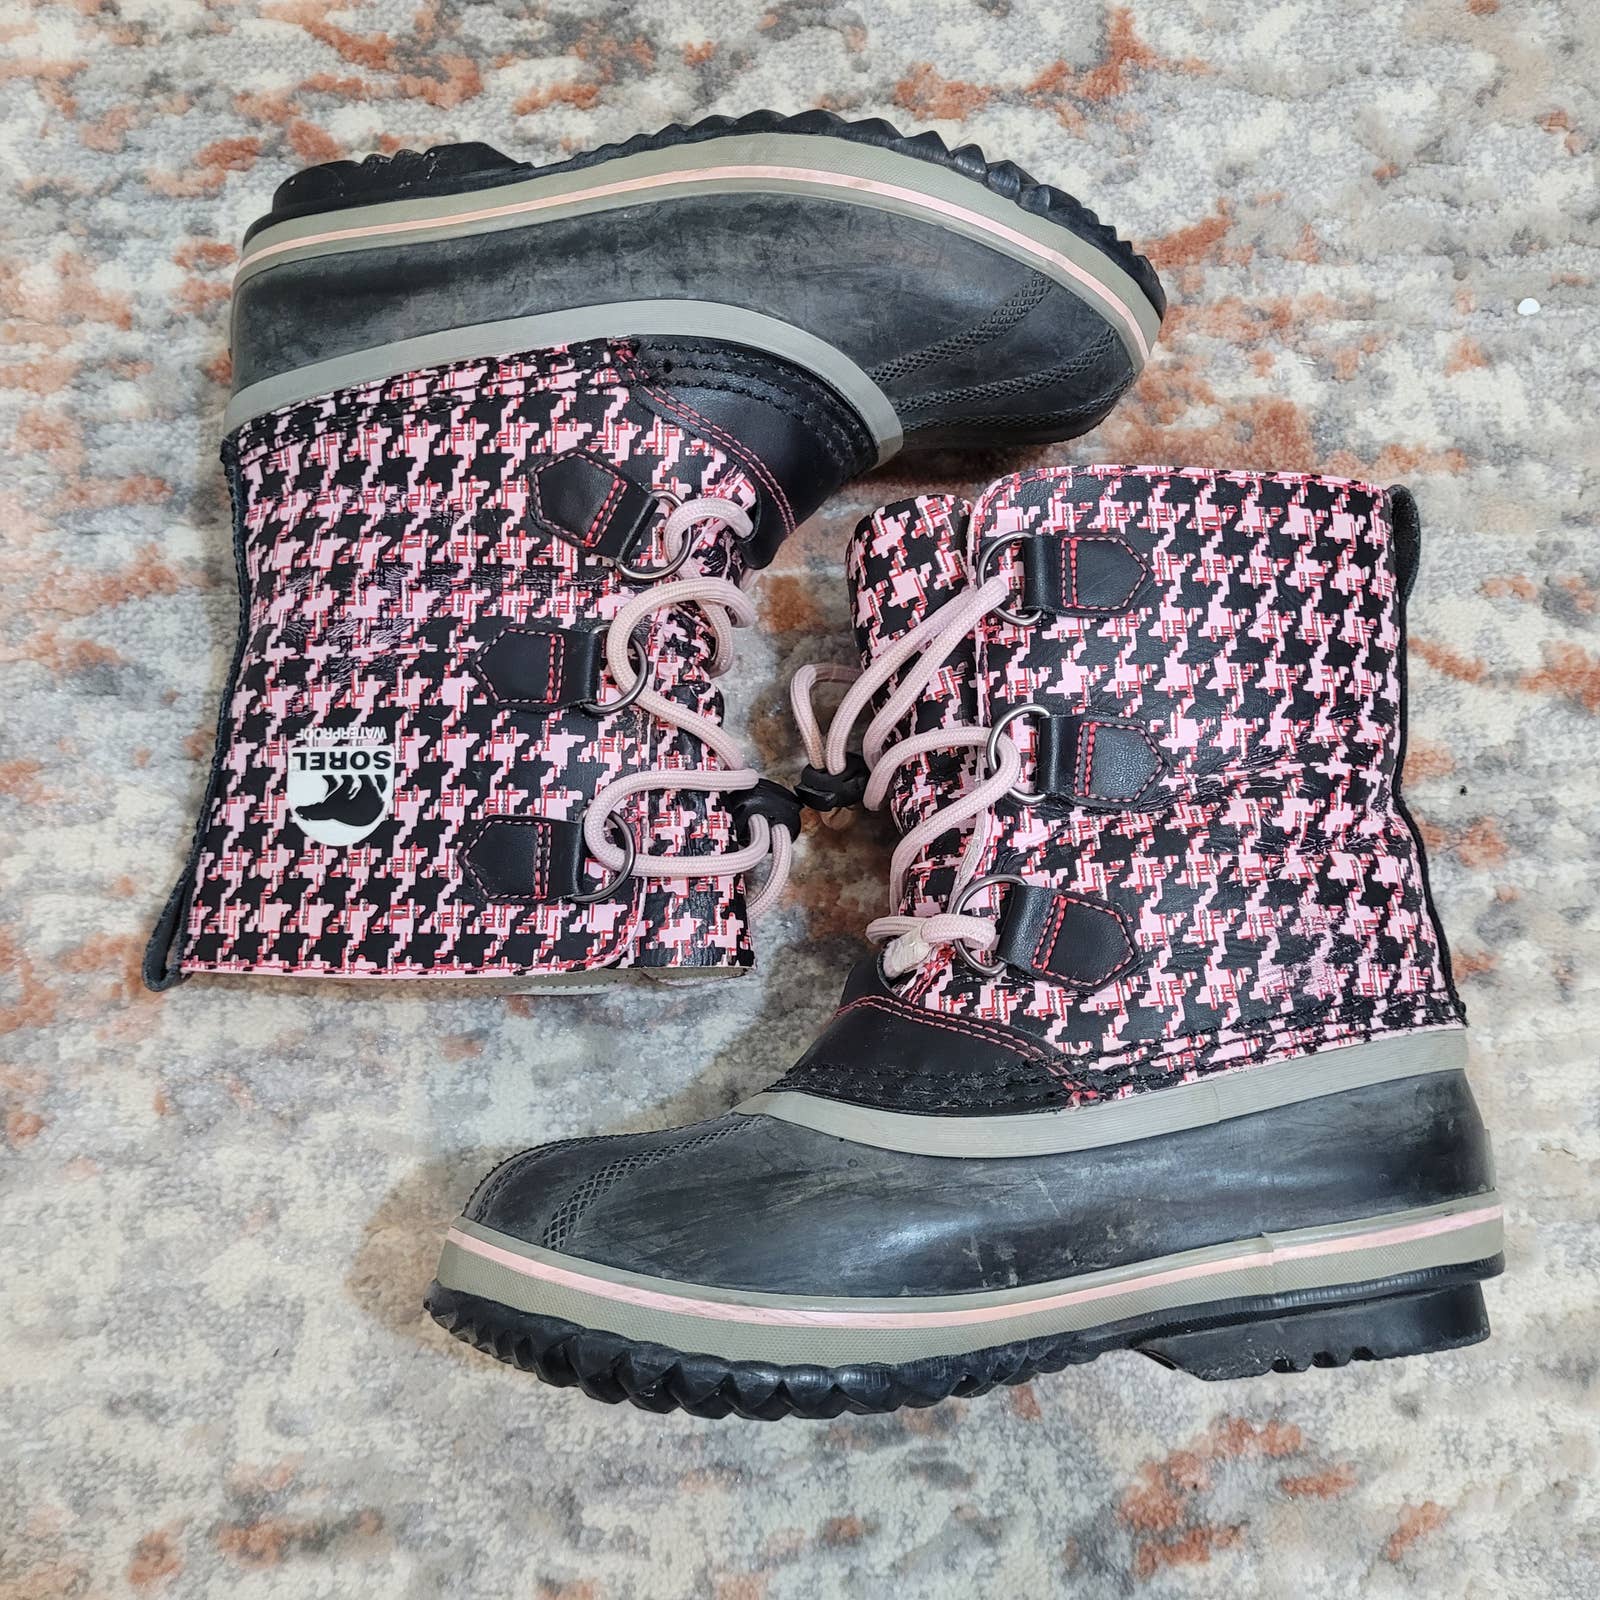 Sorel Boots NY1443-637 Waterproof Pink Black Houndstooth Boots AS IS - Size 5Markita's ClosetSorel